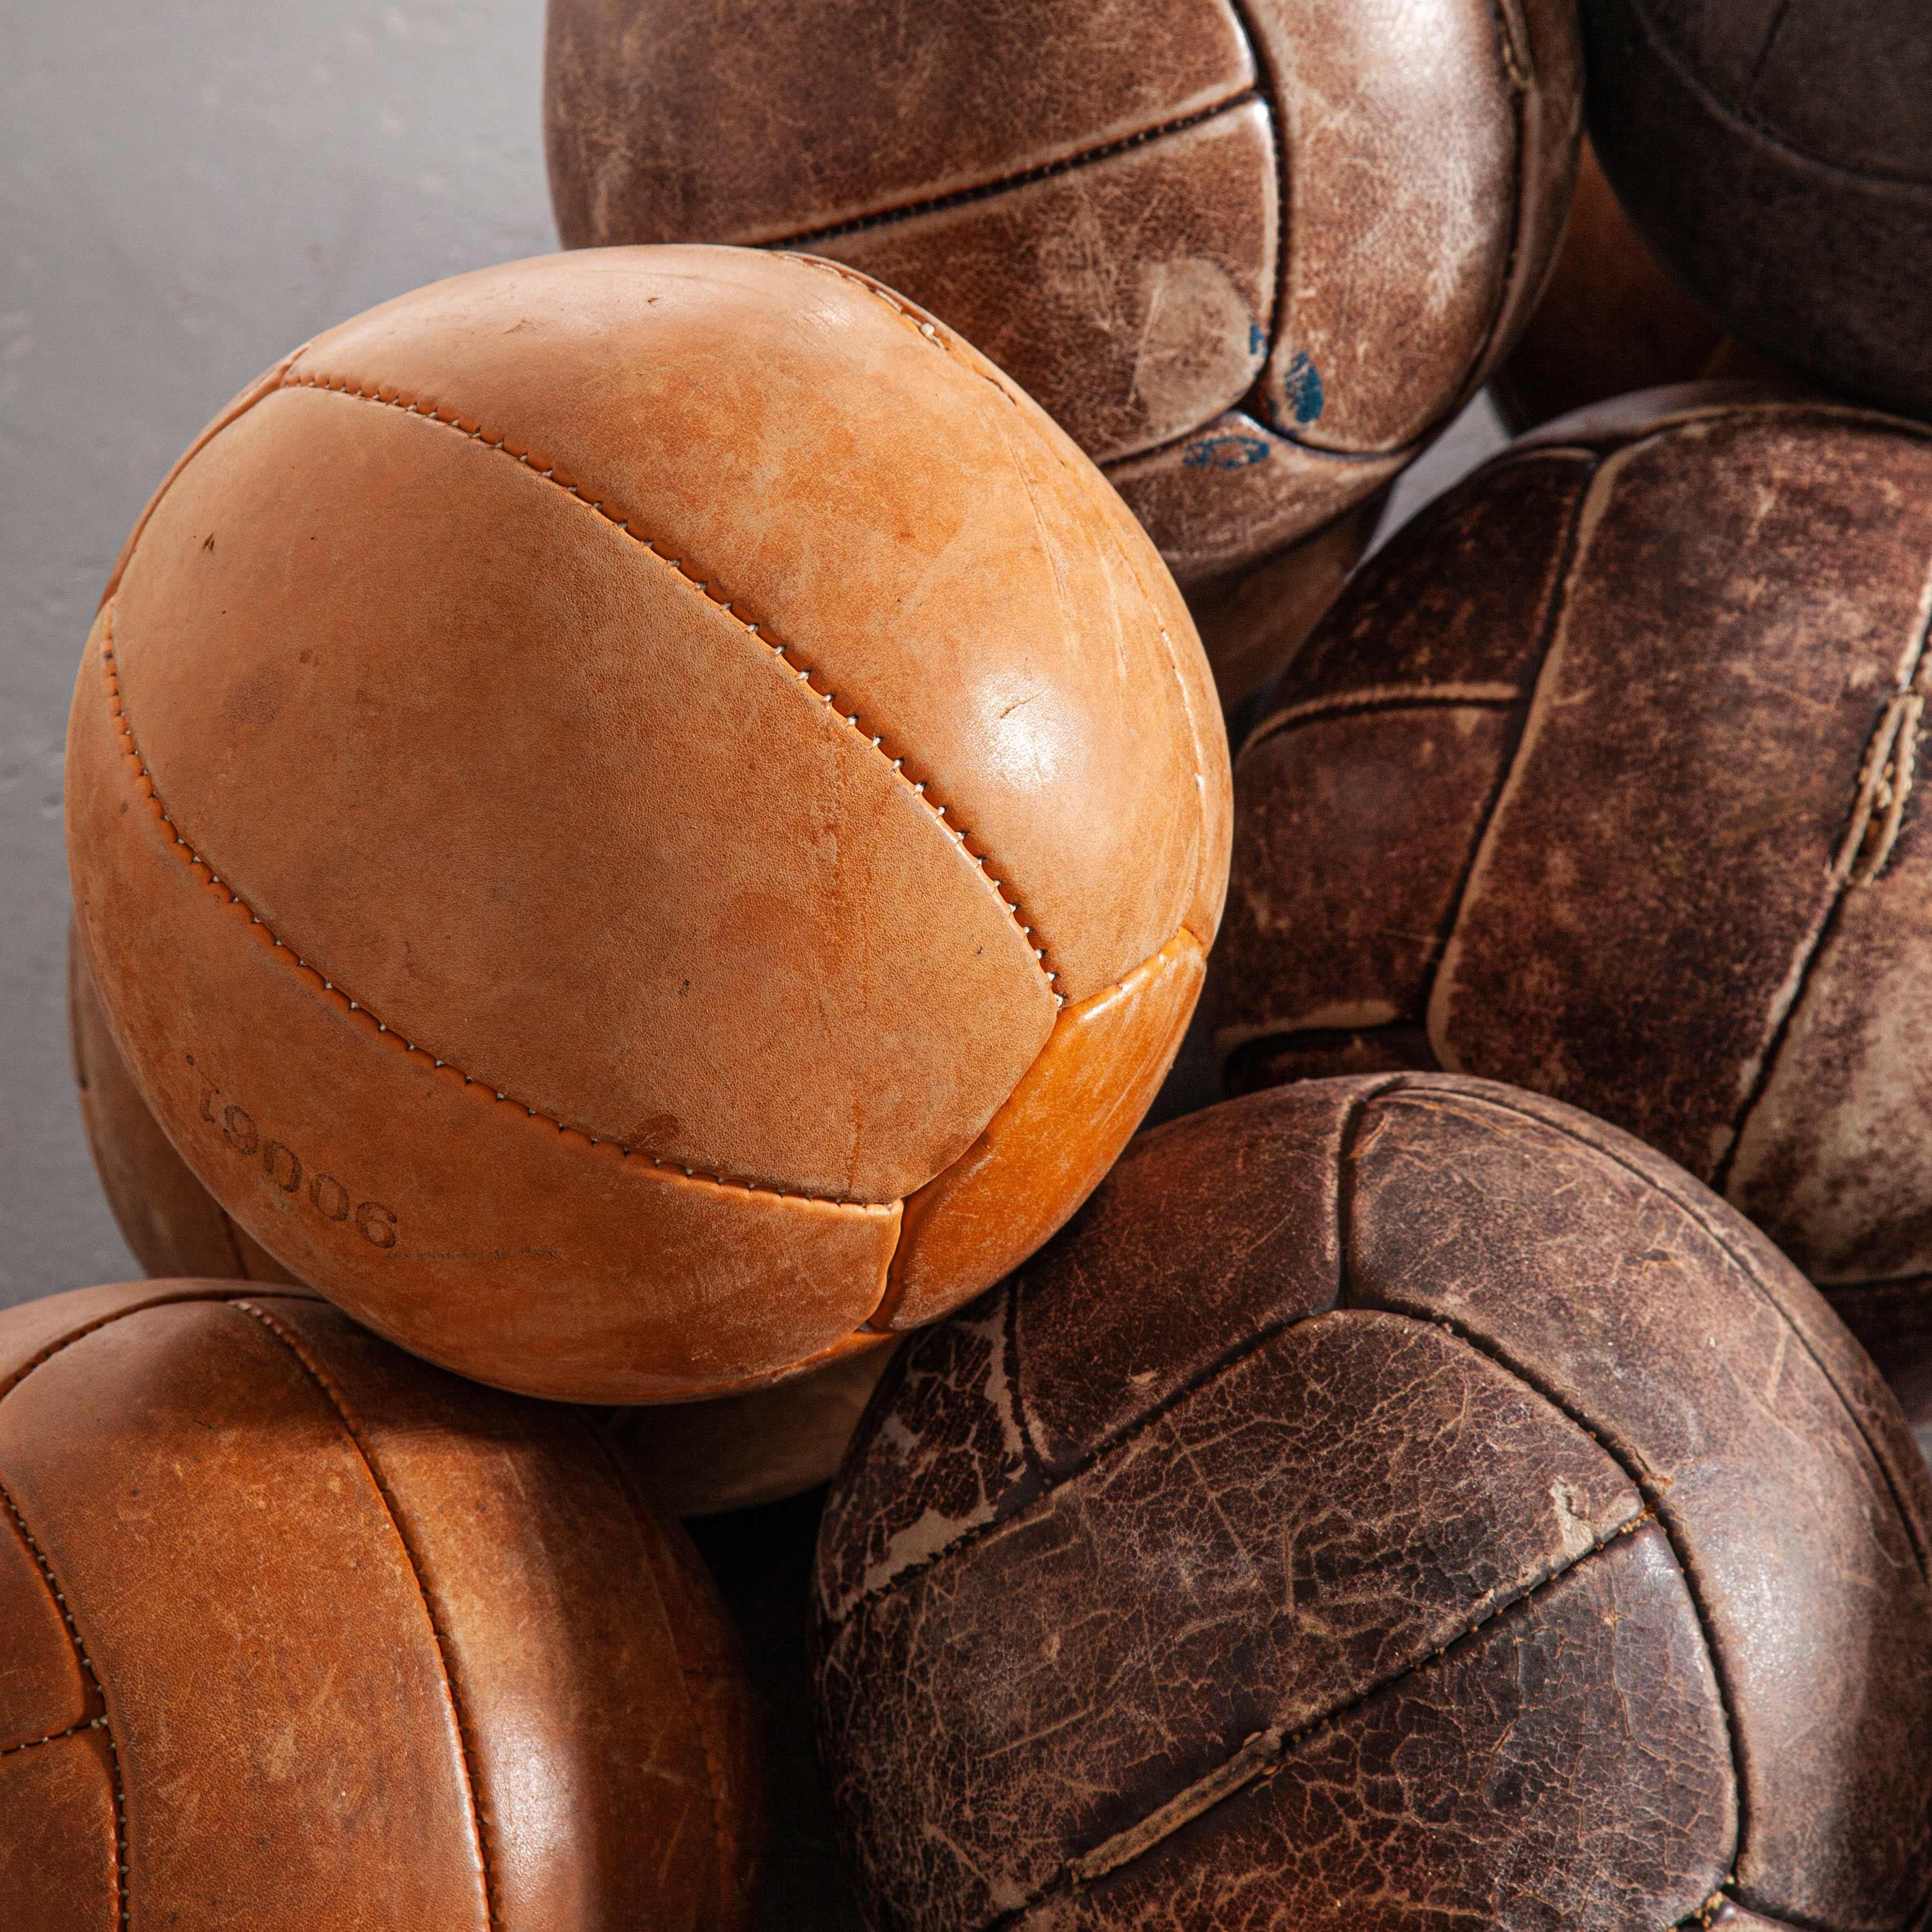 1950s medium Czech leather medicine balls – Decorative

1950s medium Czech leather medicine balls – decorative. We have a number of these large handsome worn leather medicine balls that are just full of character.

Workshop Report

Our